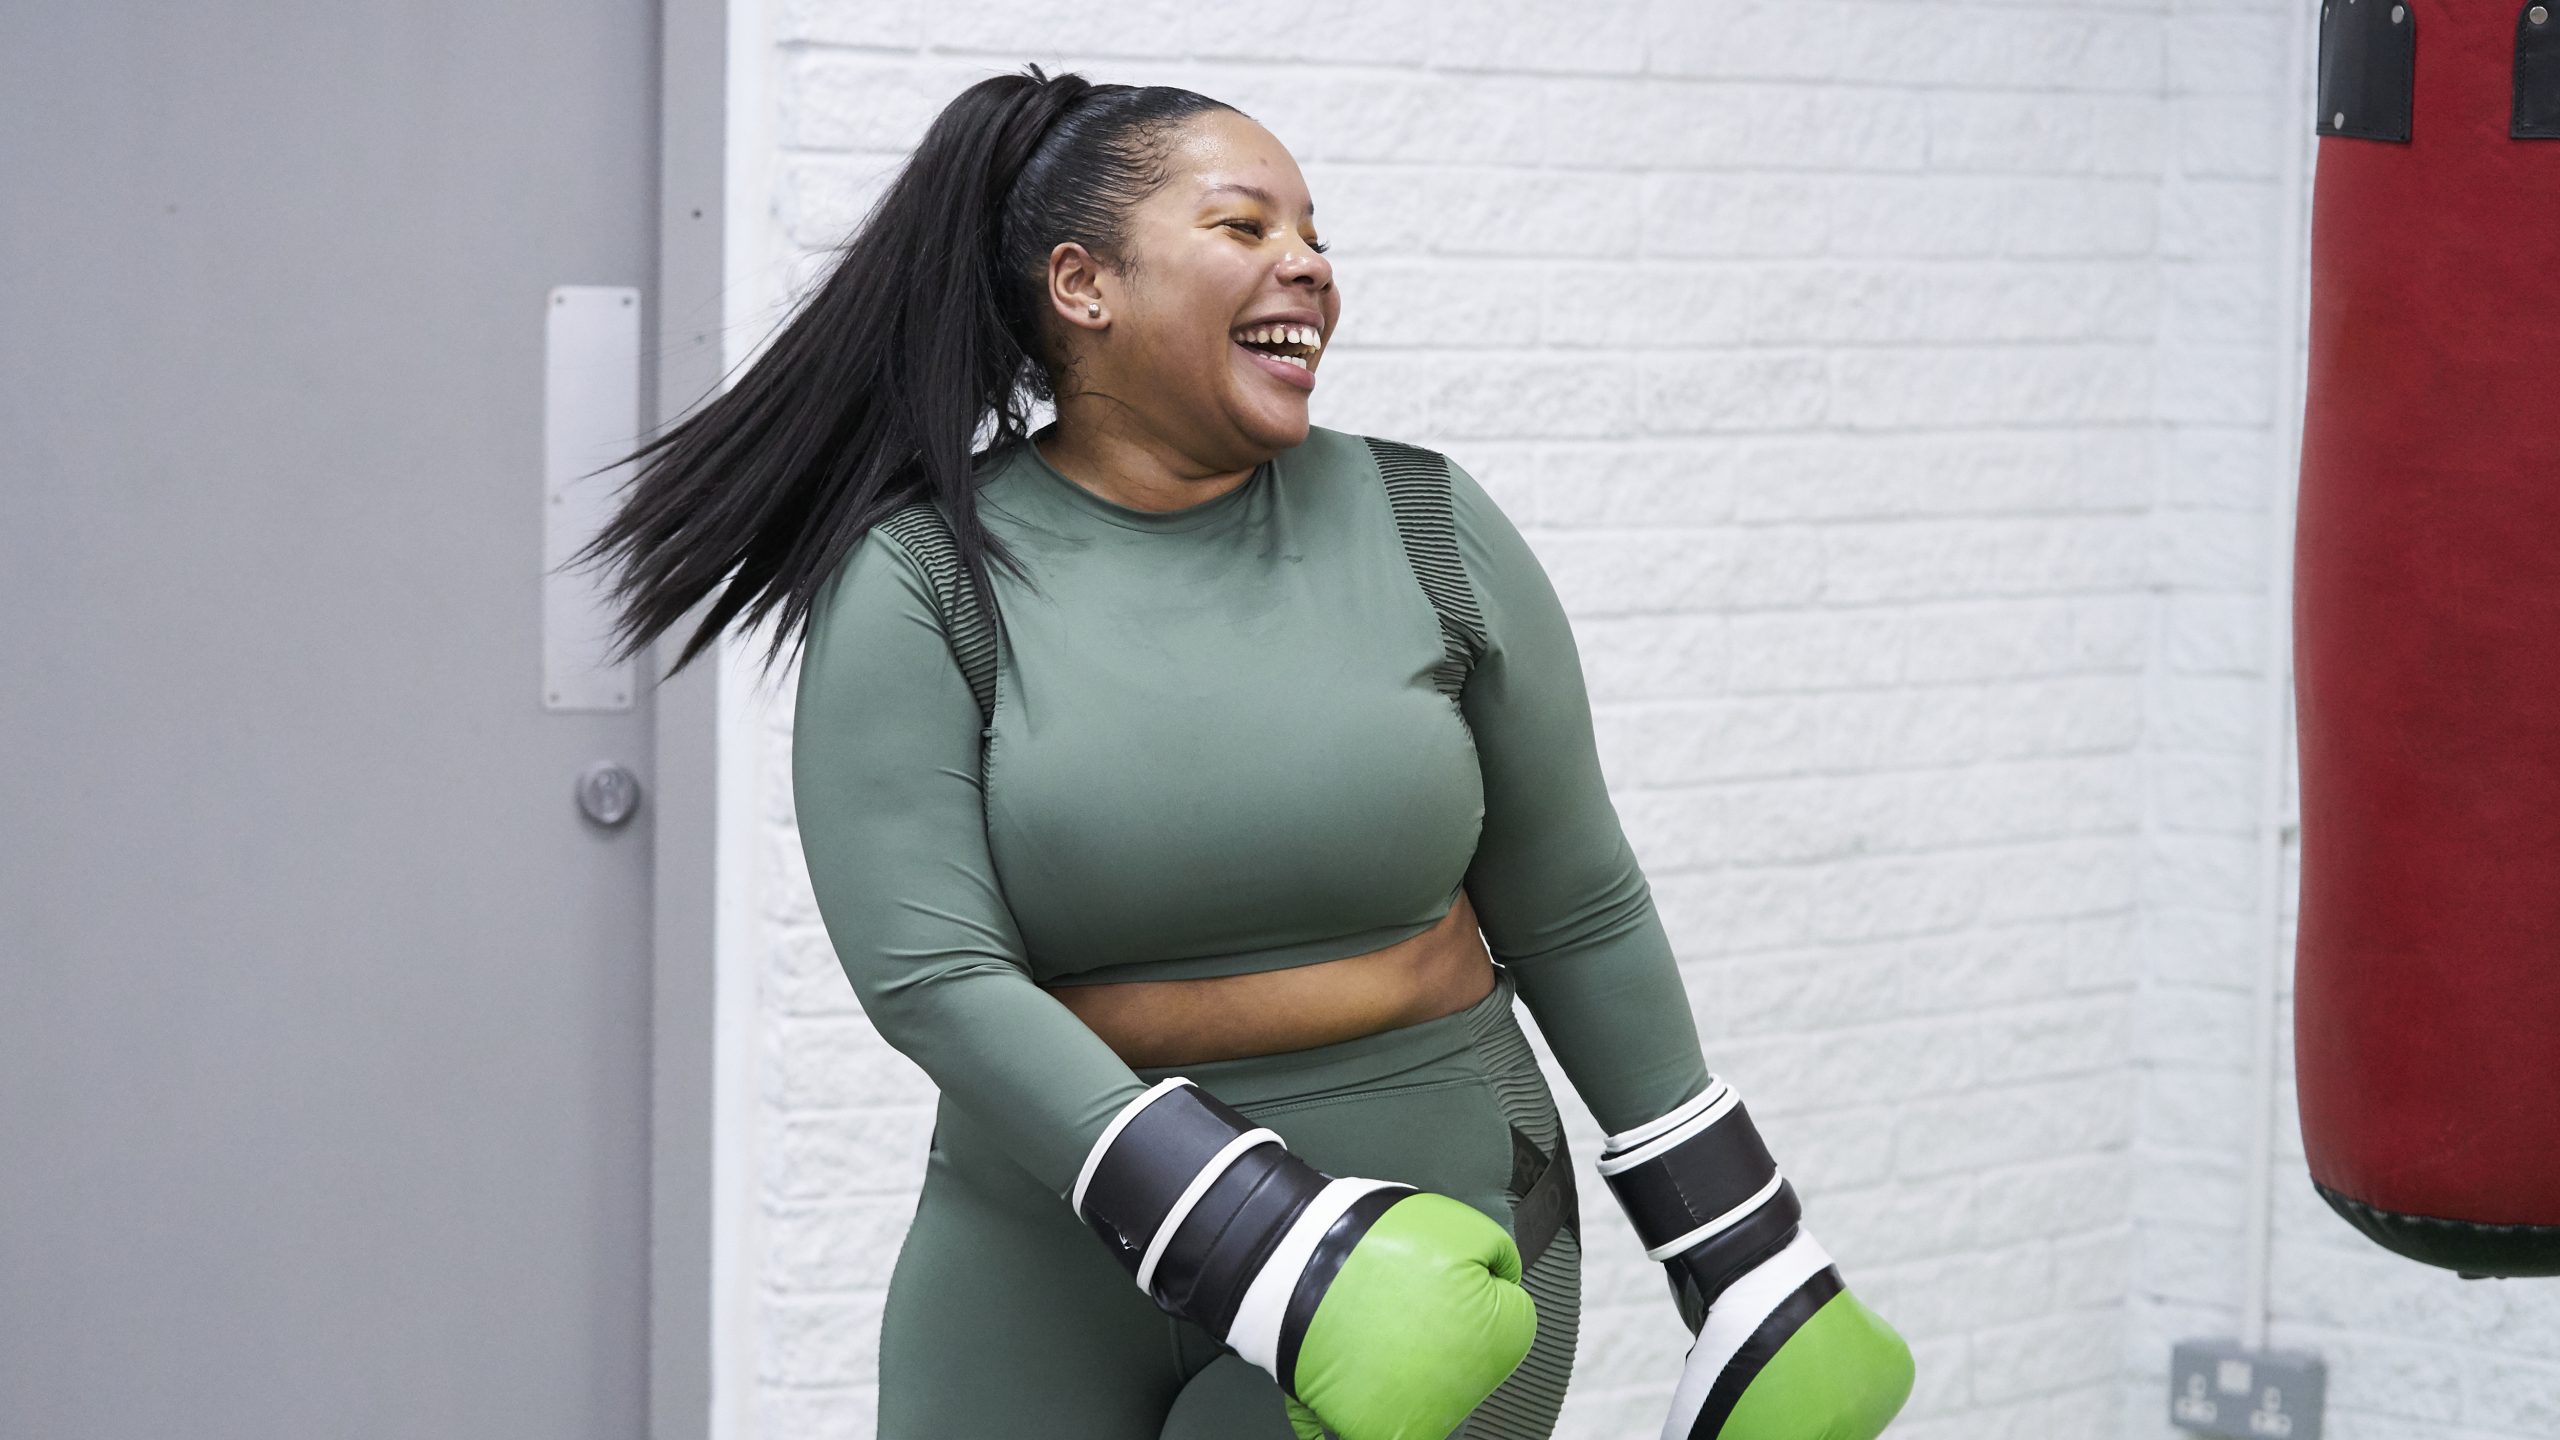 A black woman aged 25-30 laughing while practicing boxing